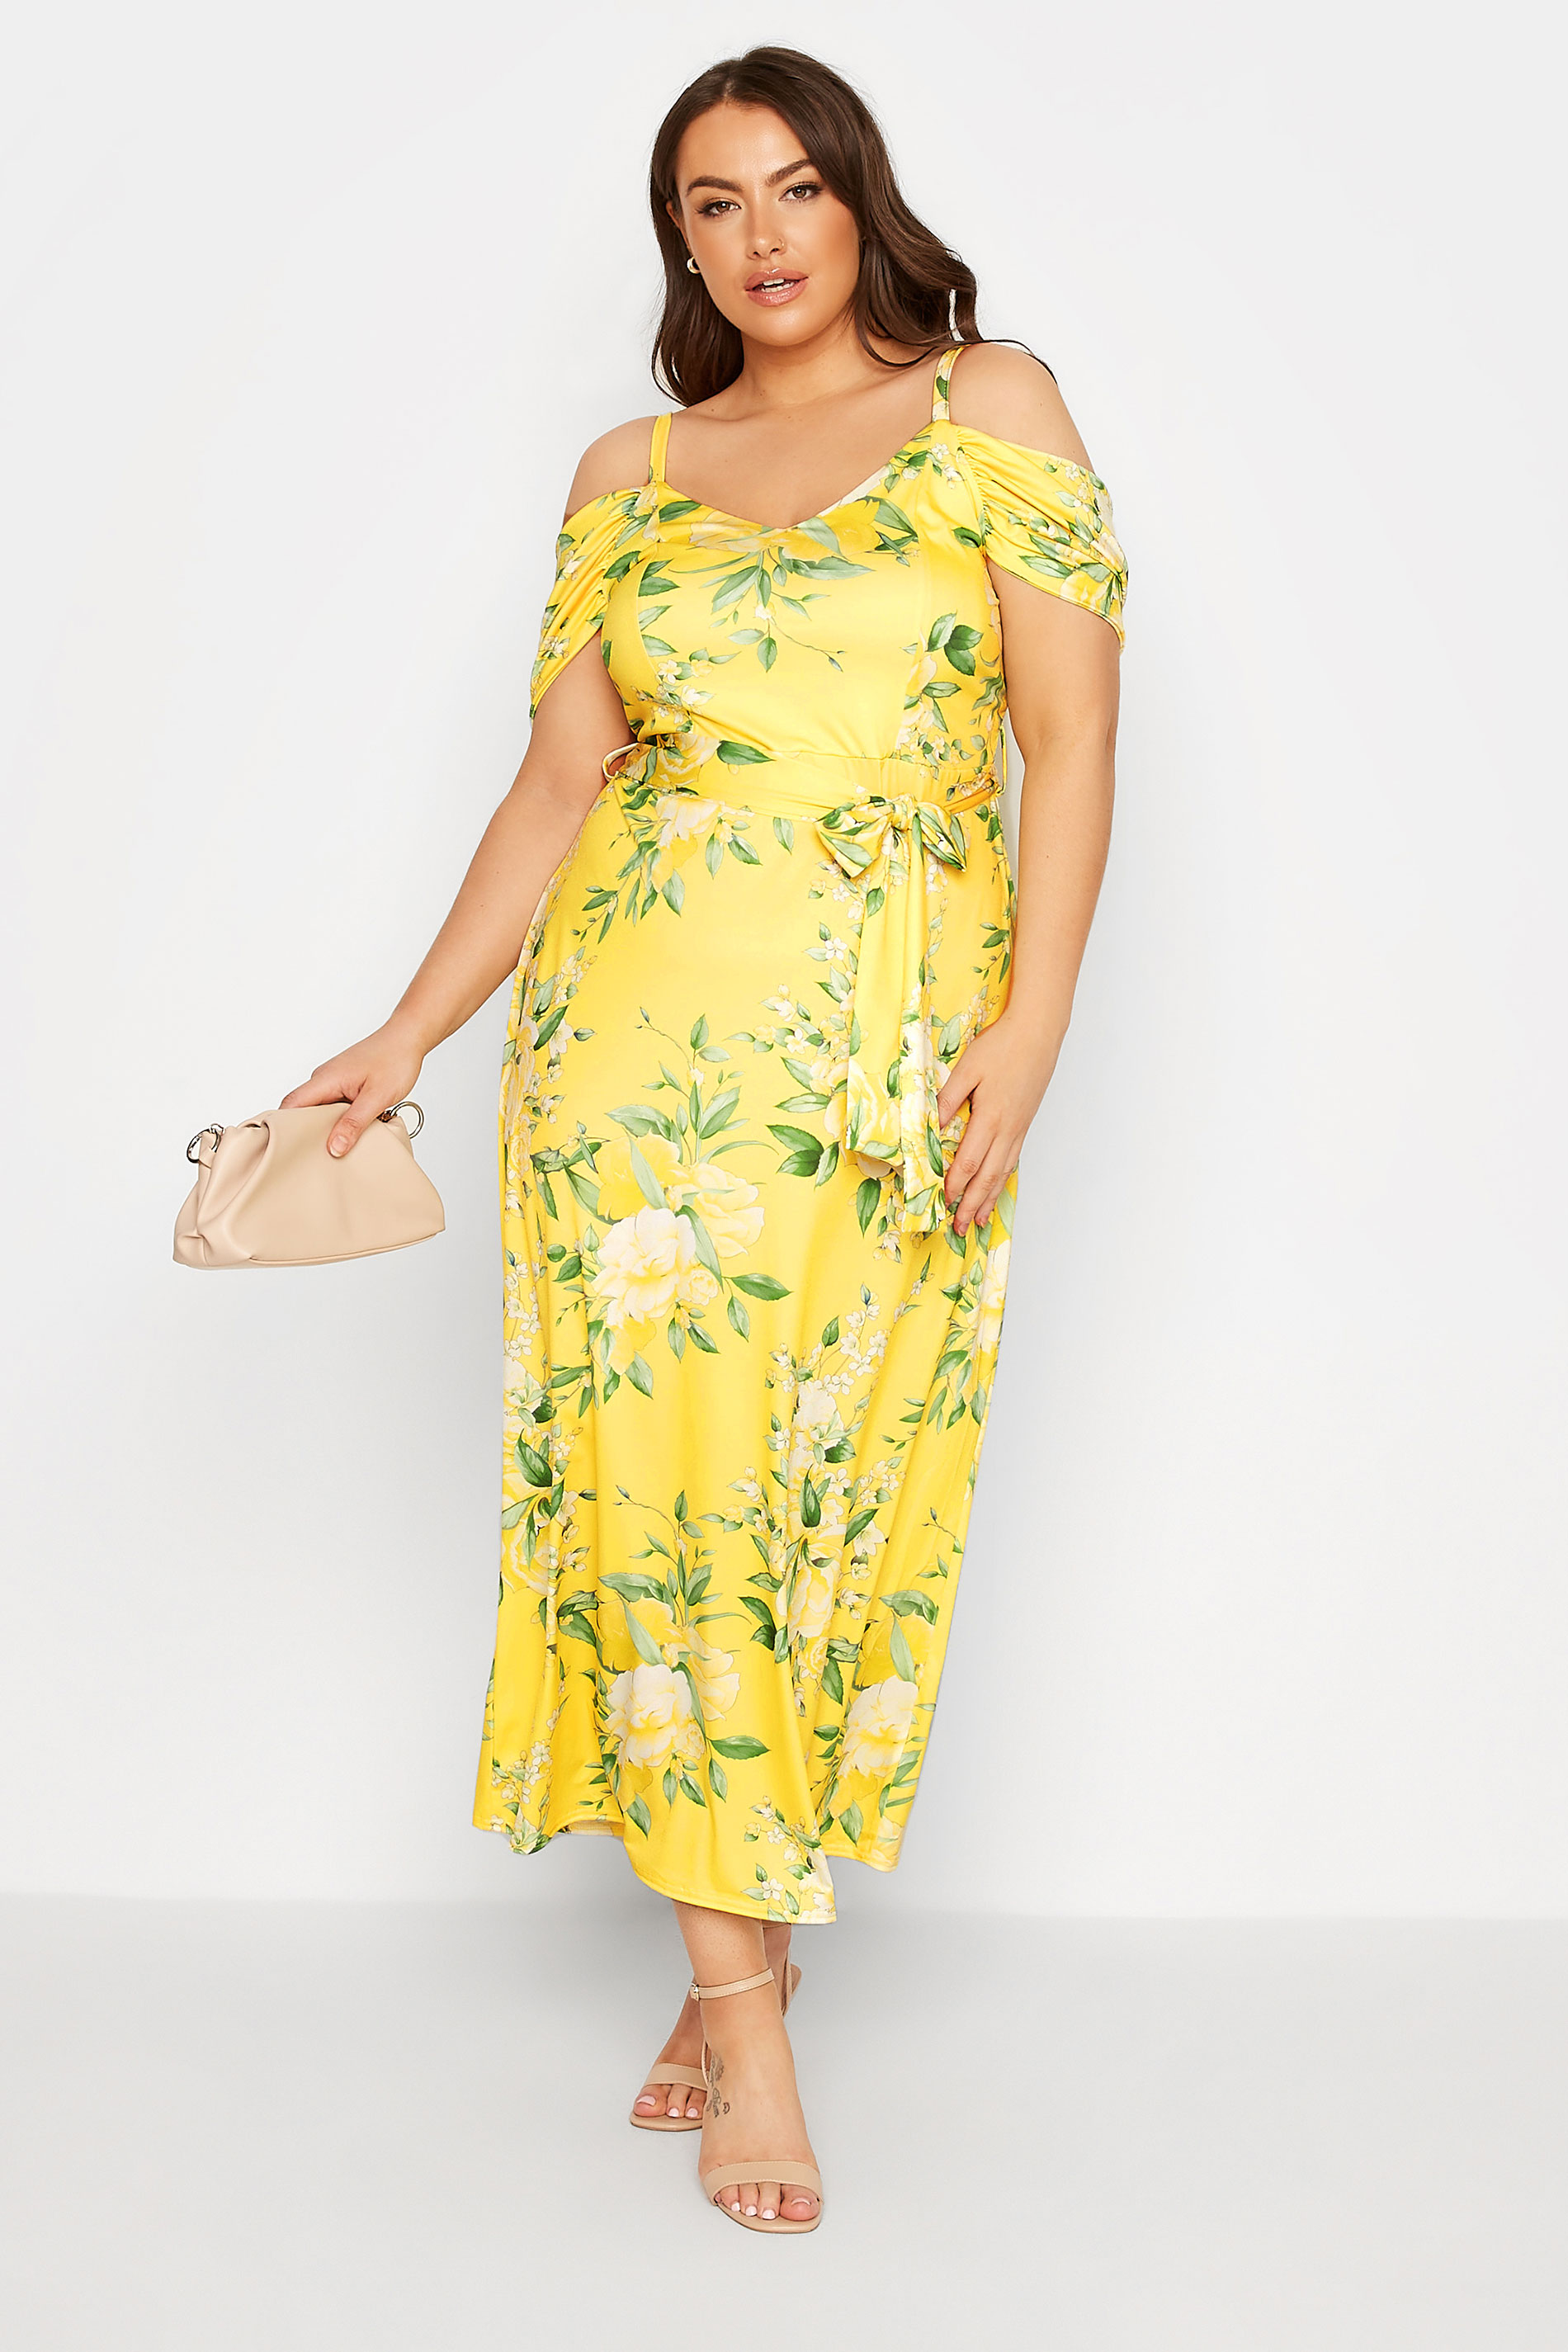 Robes Grande Taille Grande taille  Robes Longues | YOURS LONDON - Robe Jaune Floral Design Bardot - ZH17287